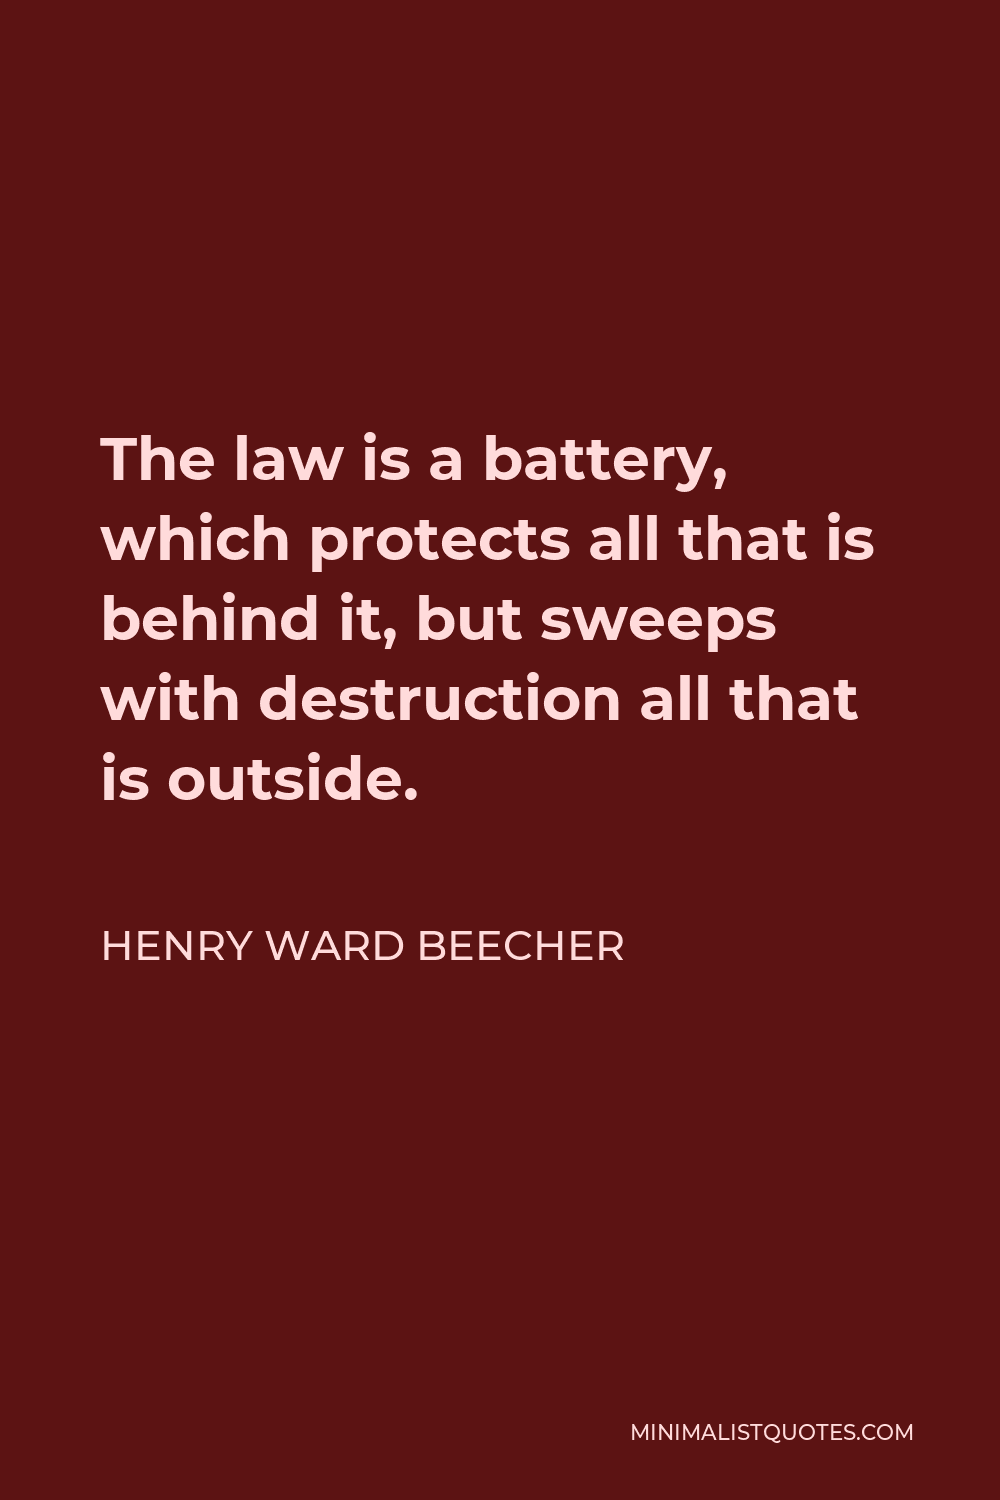 Henry Ward Beecher Quote - The law is a battery, which protects all that is behind it, but sweeps with destruction all that is outside.